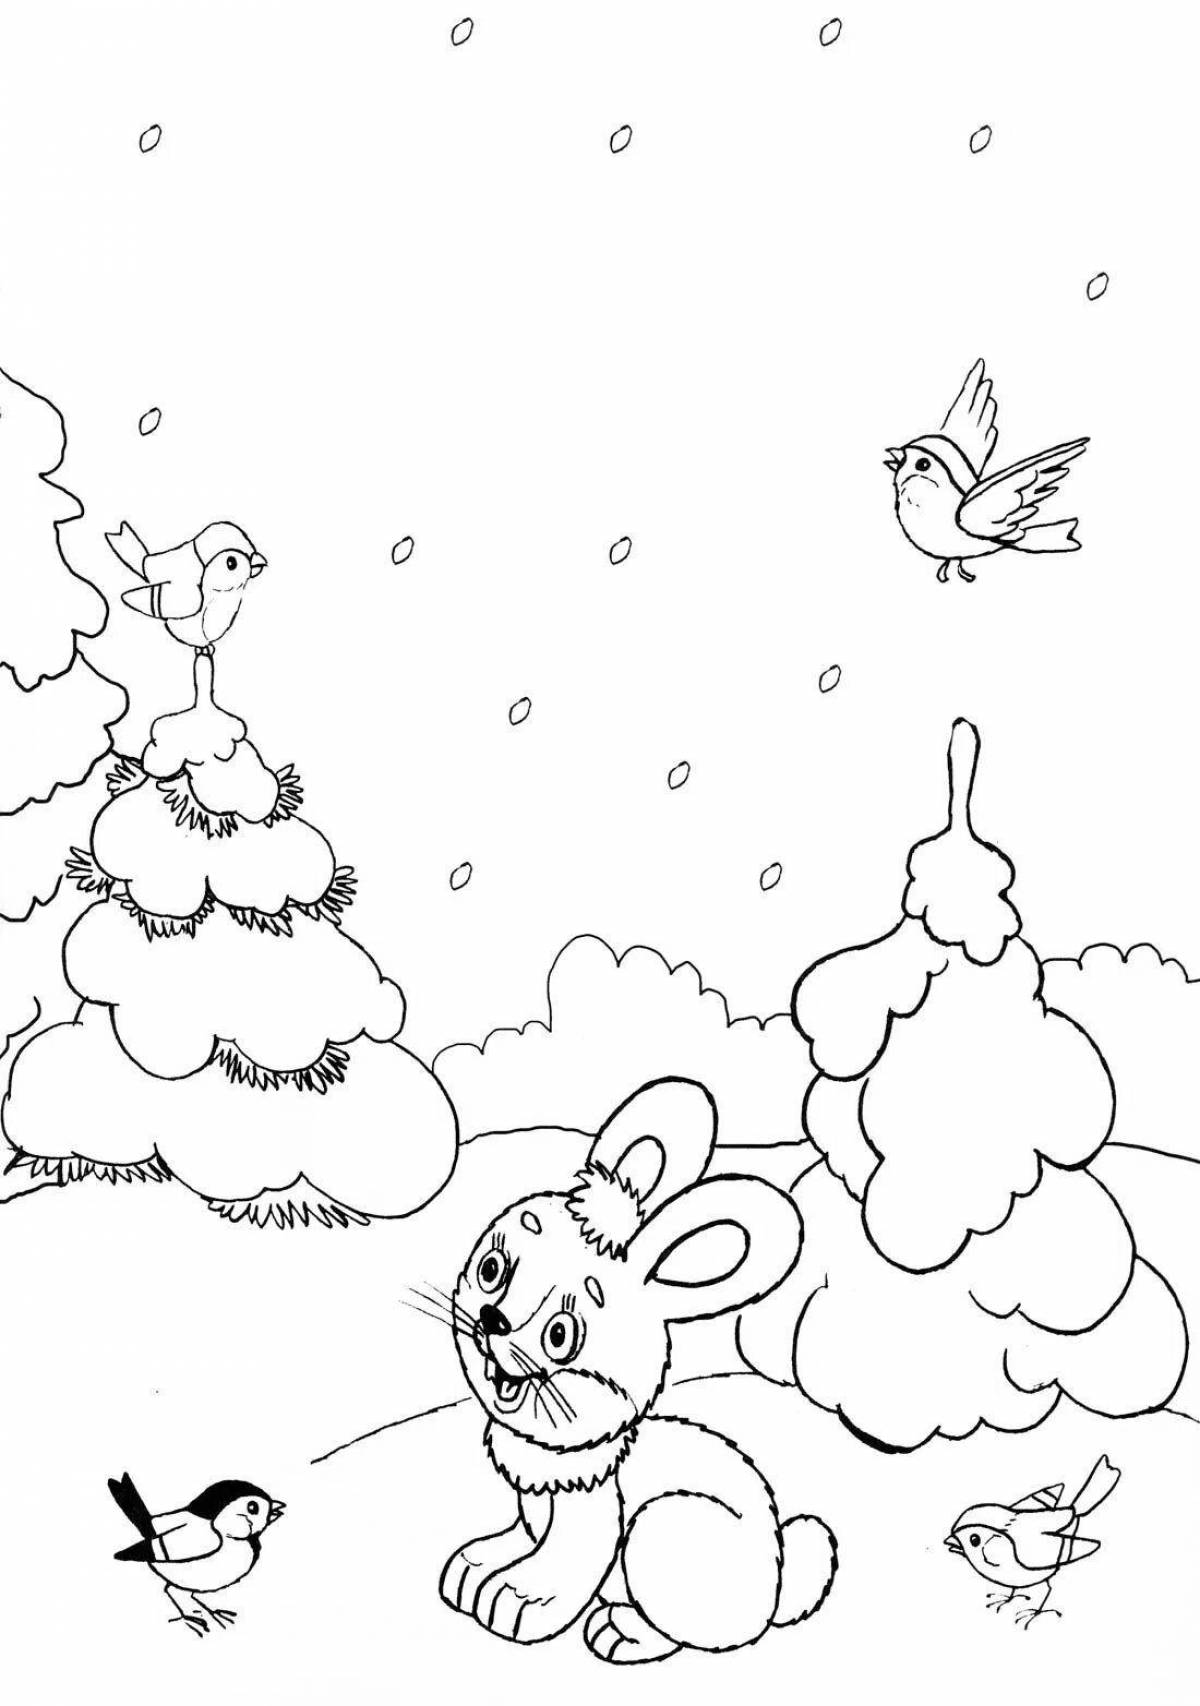 Exciting winter animal coloring book for 3-4 year olds